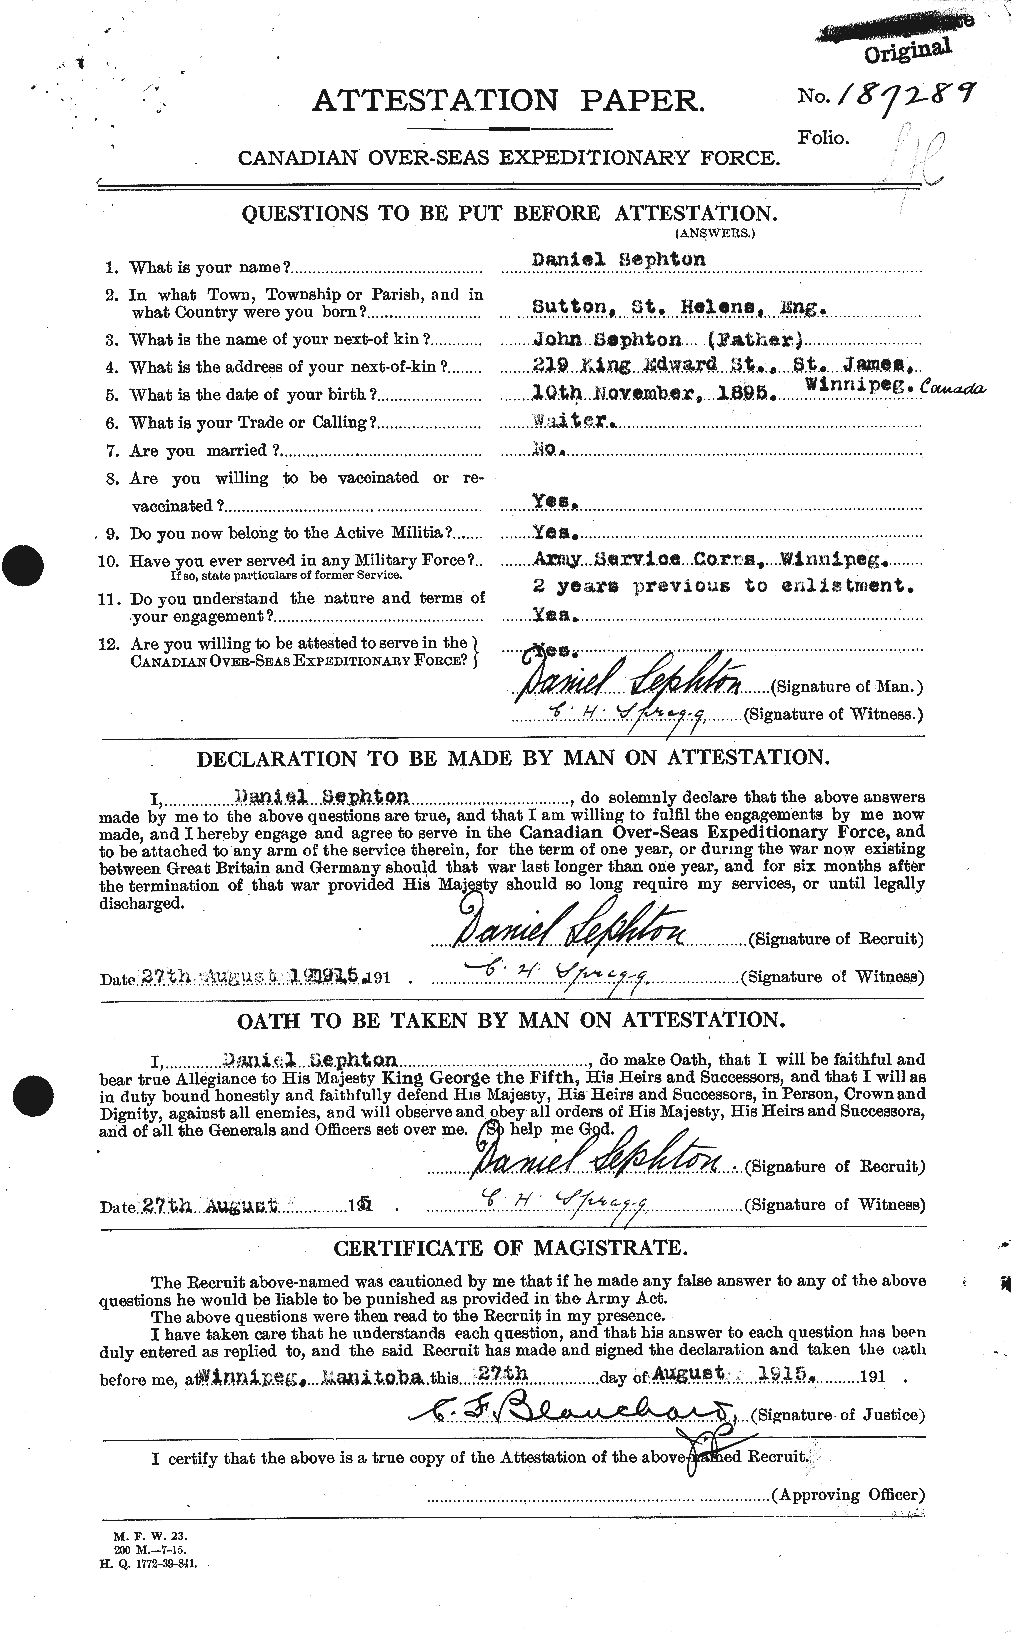 Personnel Records of the First World War - CEF 092217a